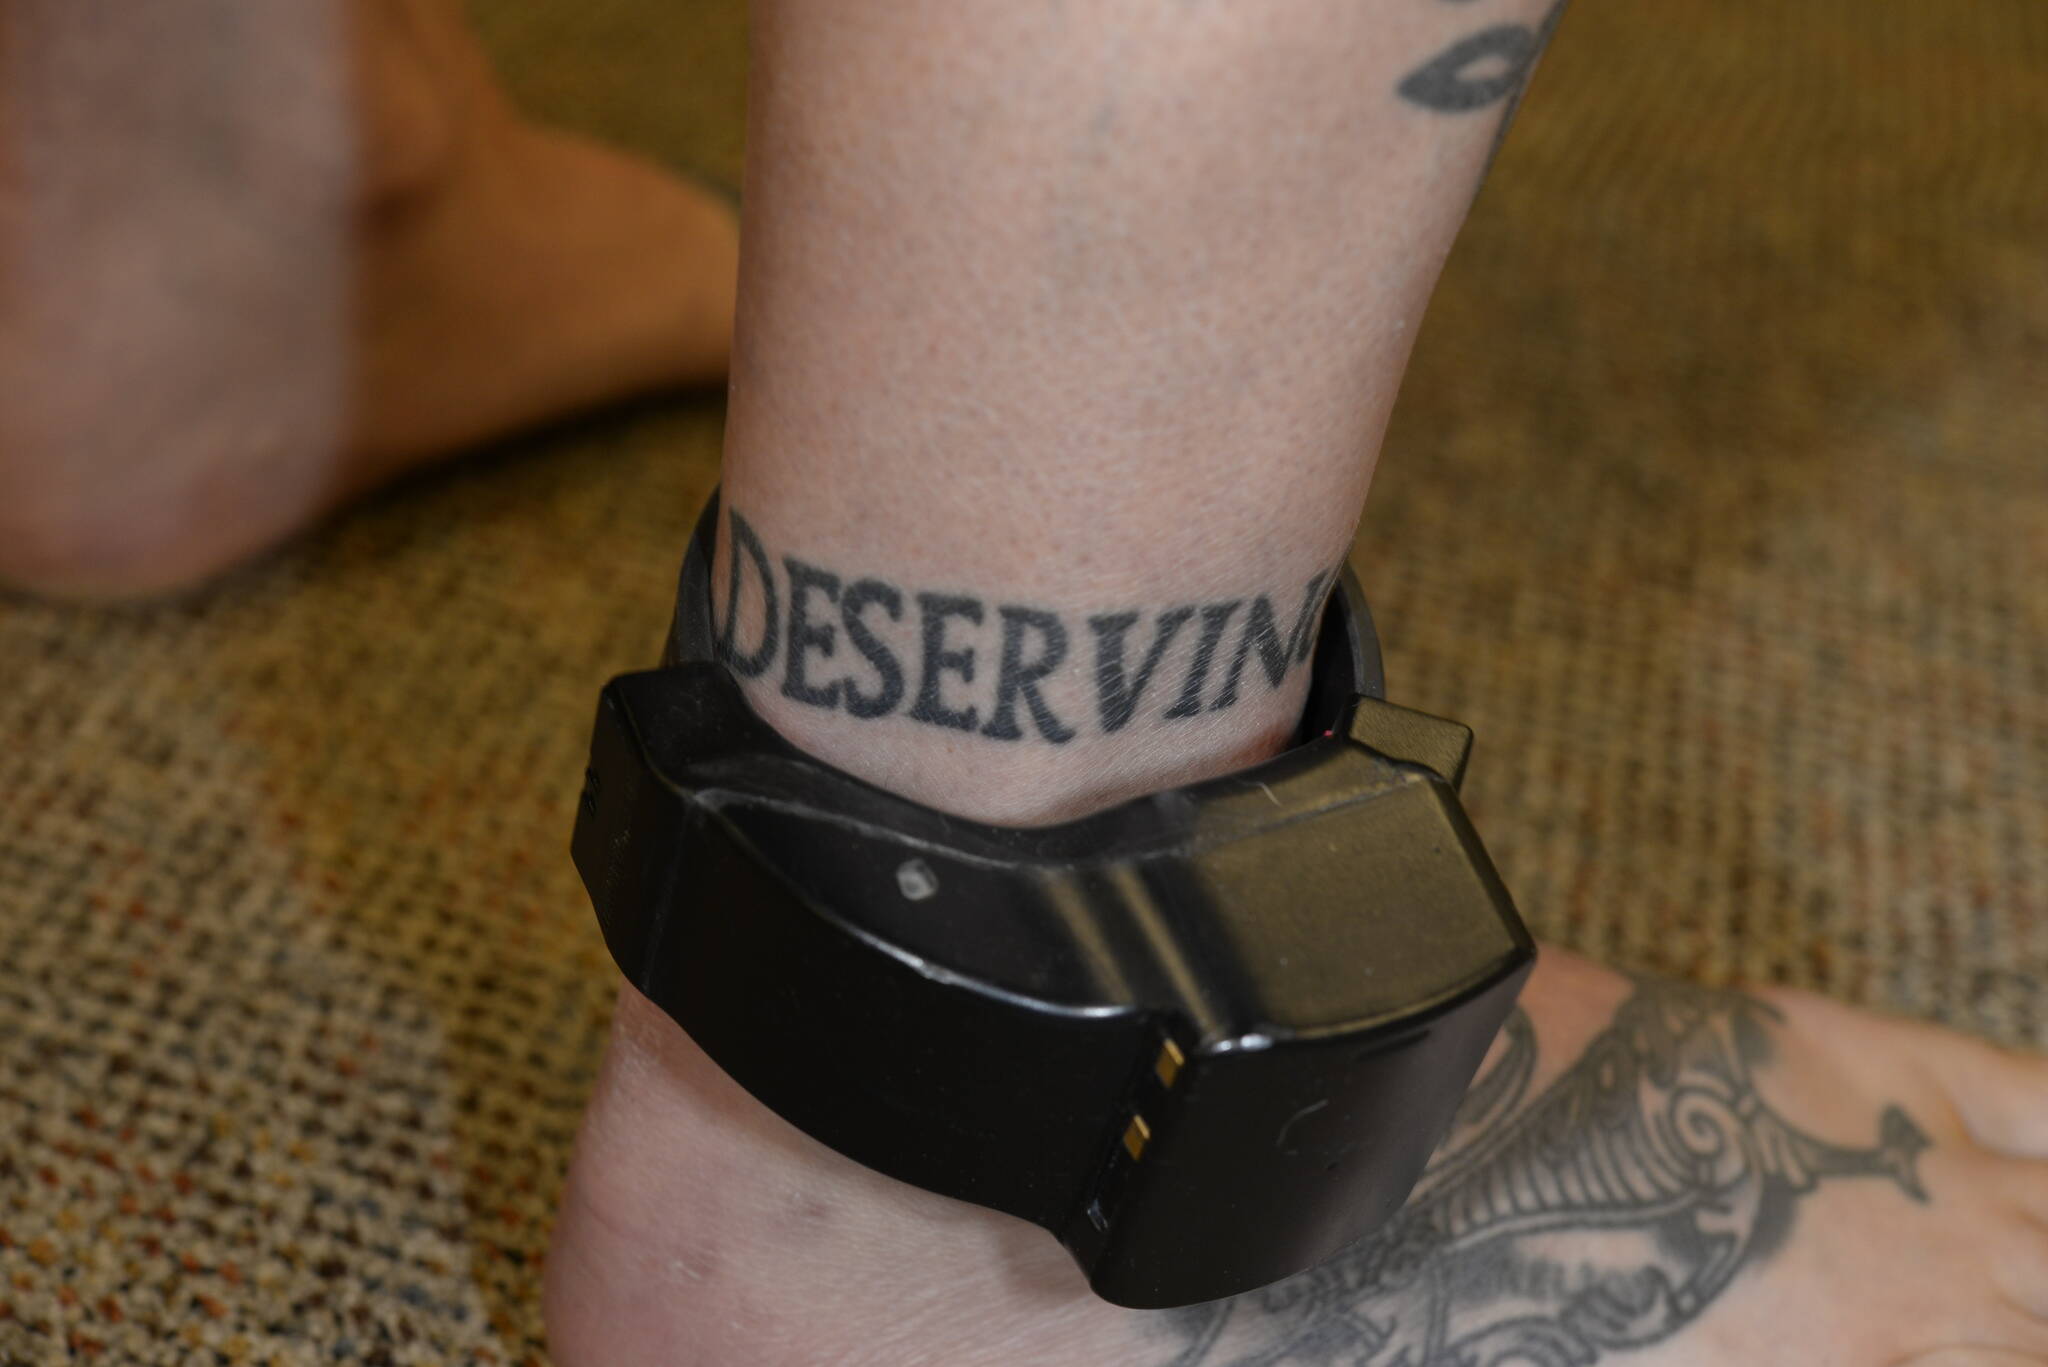 Nelson’s ankle tattoo reads “punish the deserving.” These photos were taken by the FBI after Nelson was charged with murder. Courtesy photo